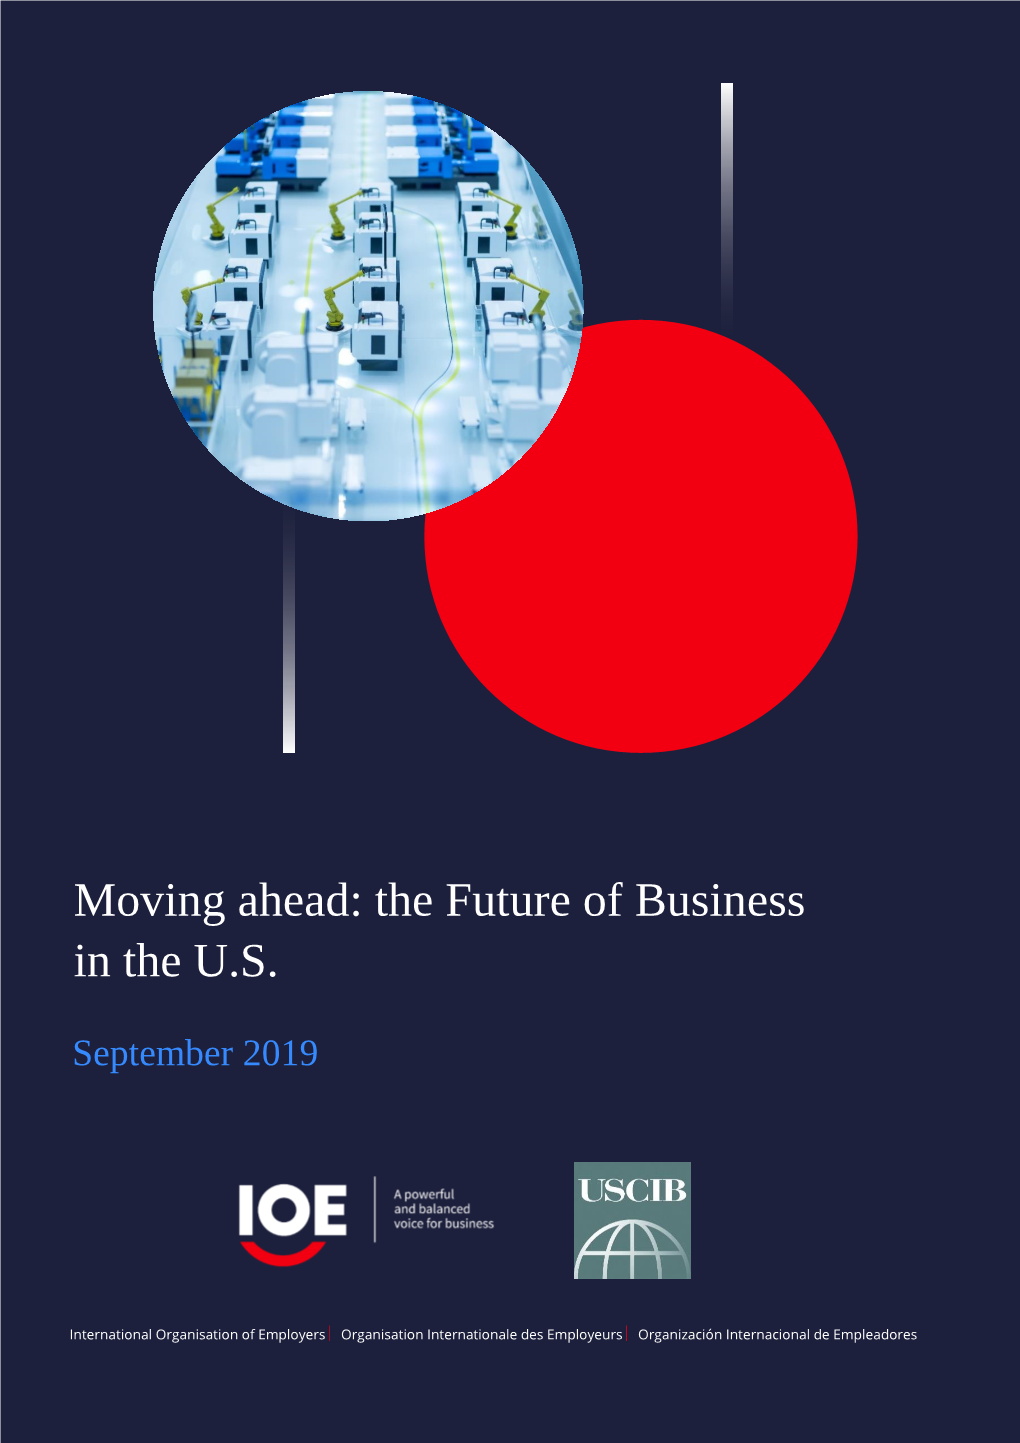 Moving Ahead: the Future of Business in the U.S